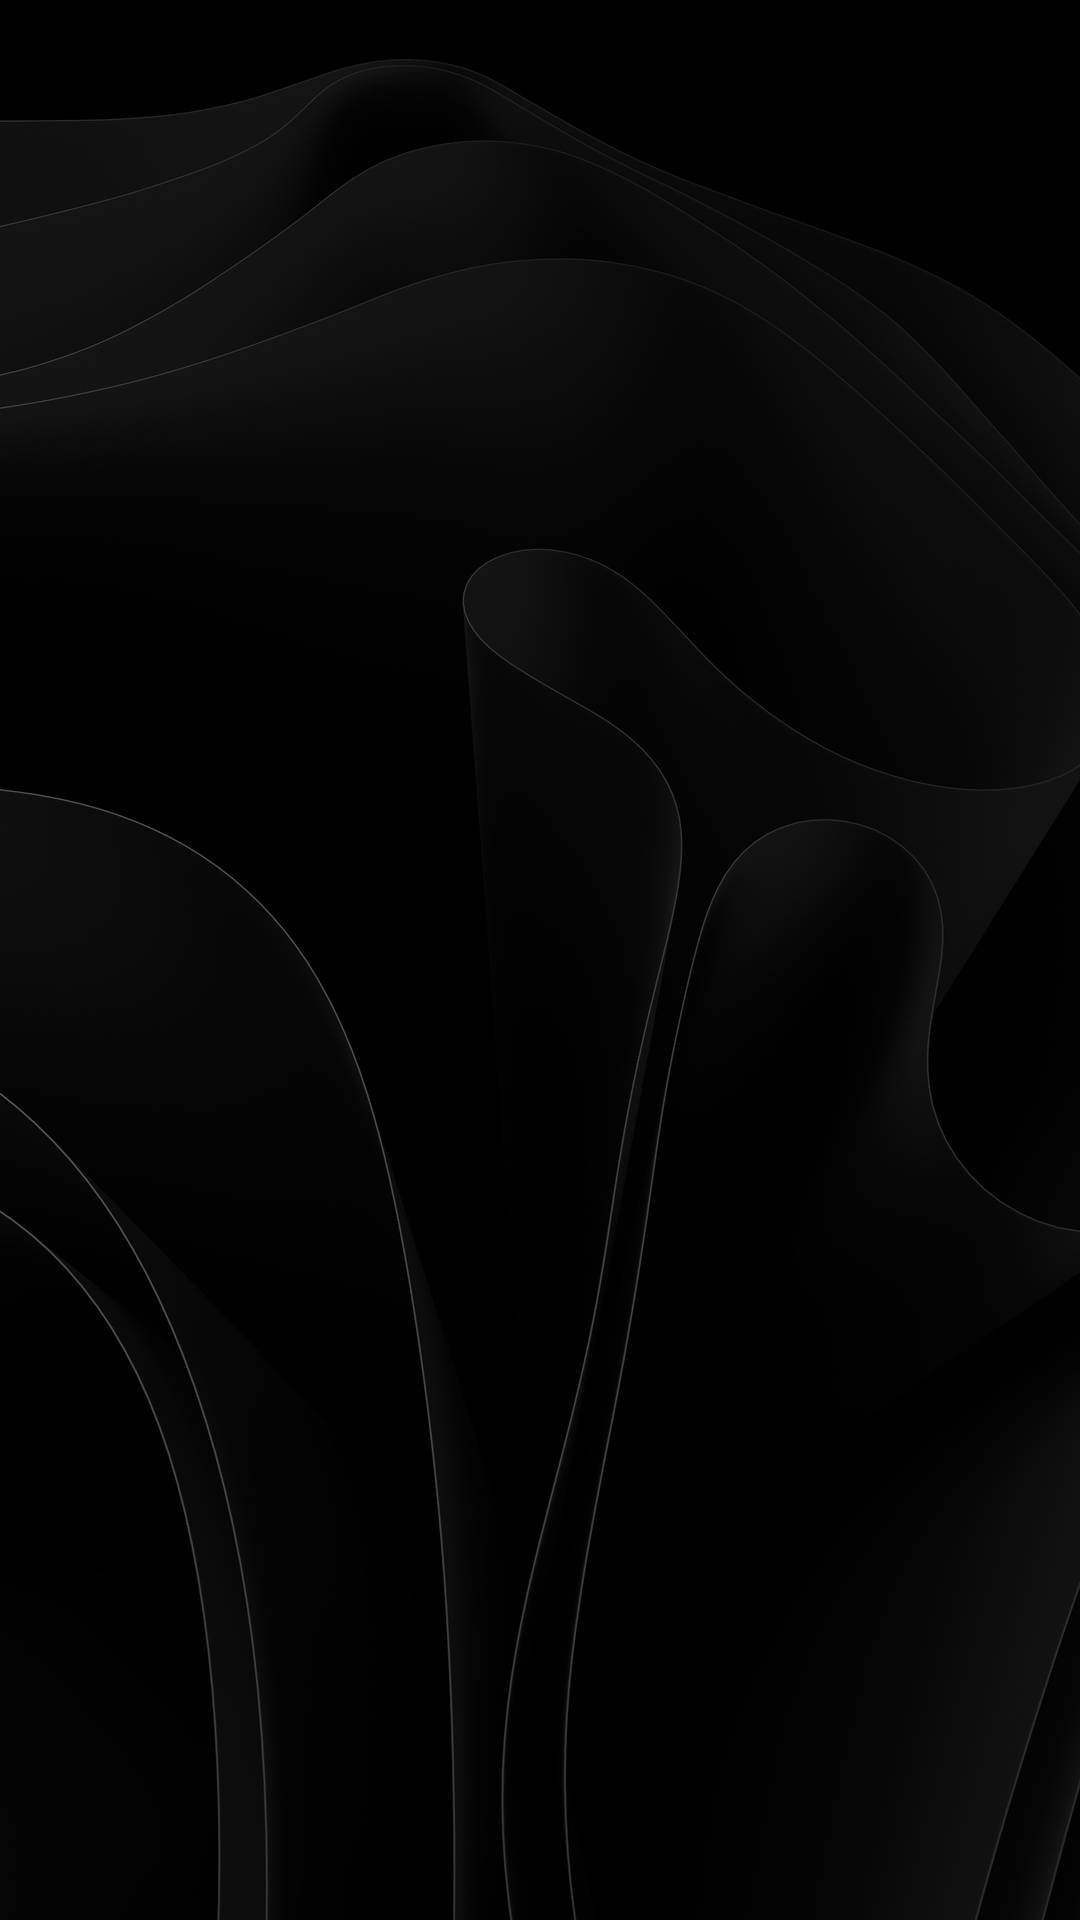 Abstract Black and White Design Wallpaper